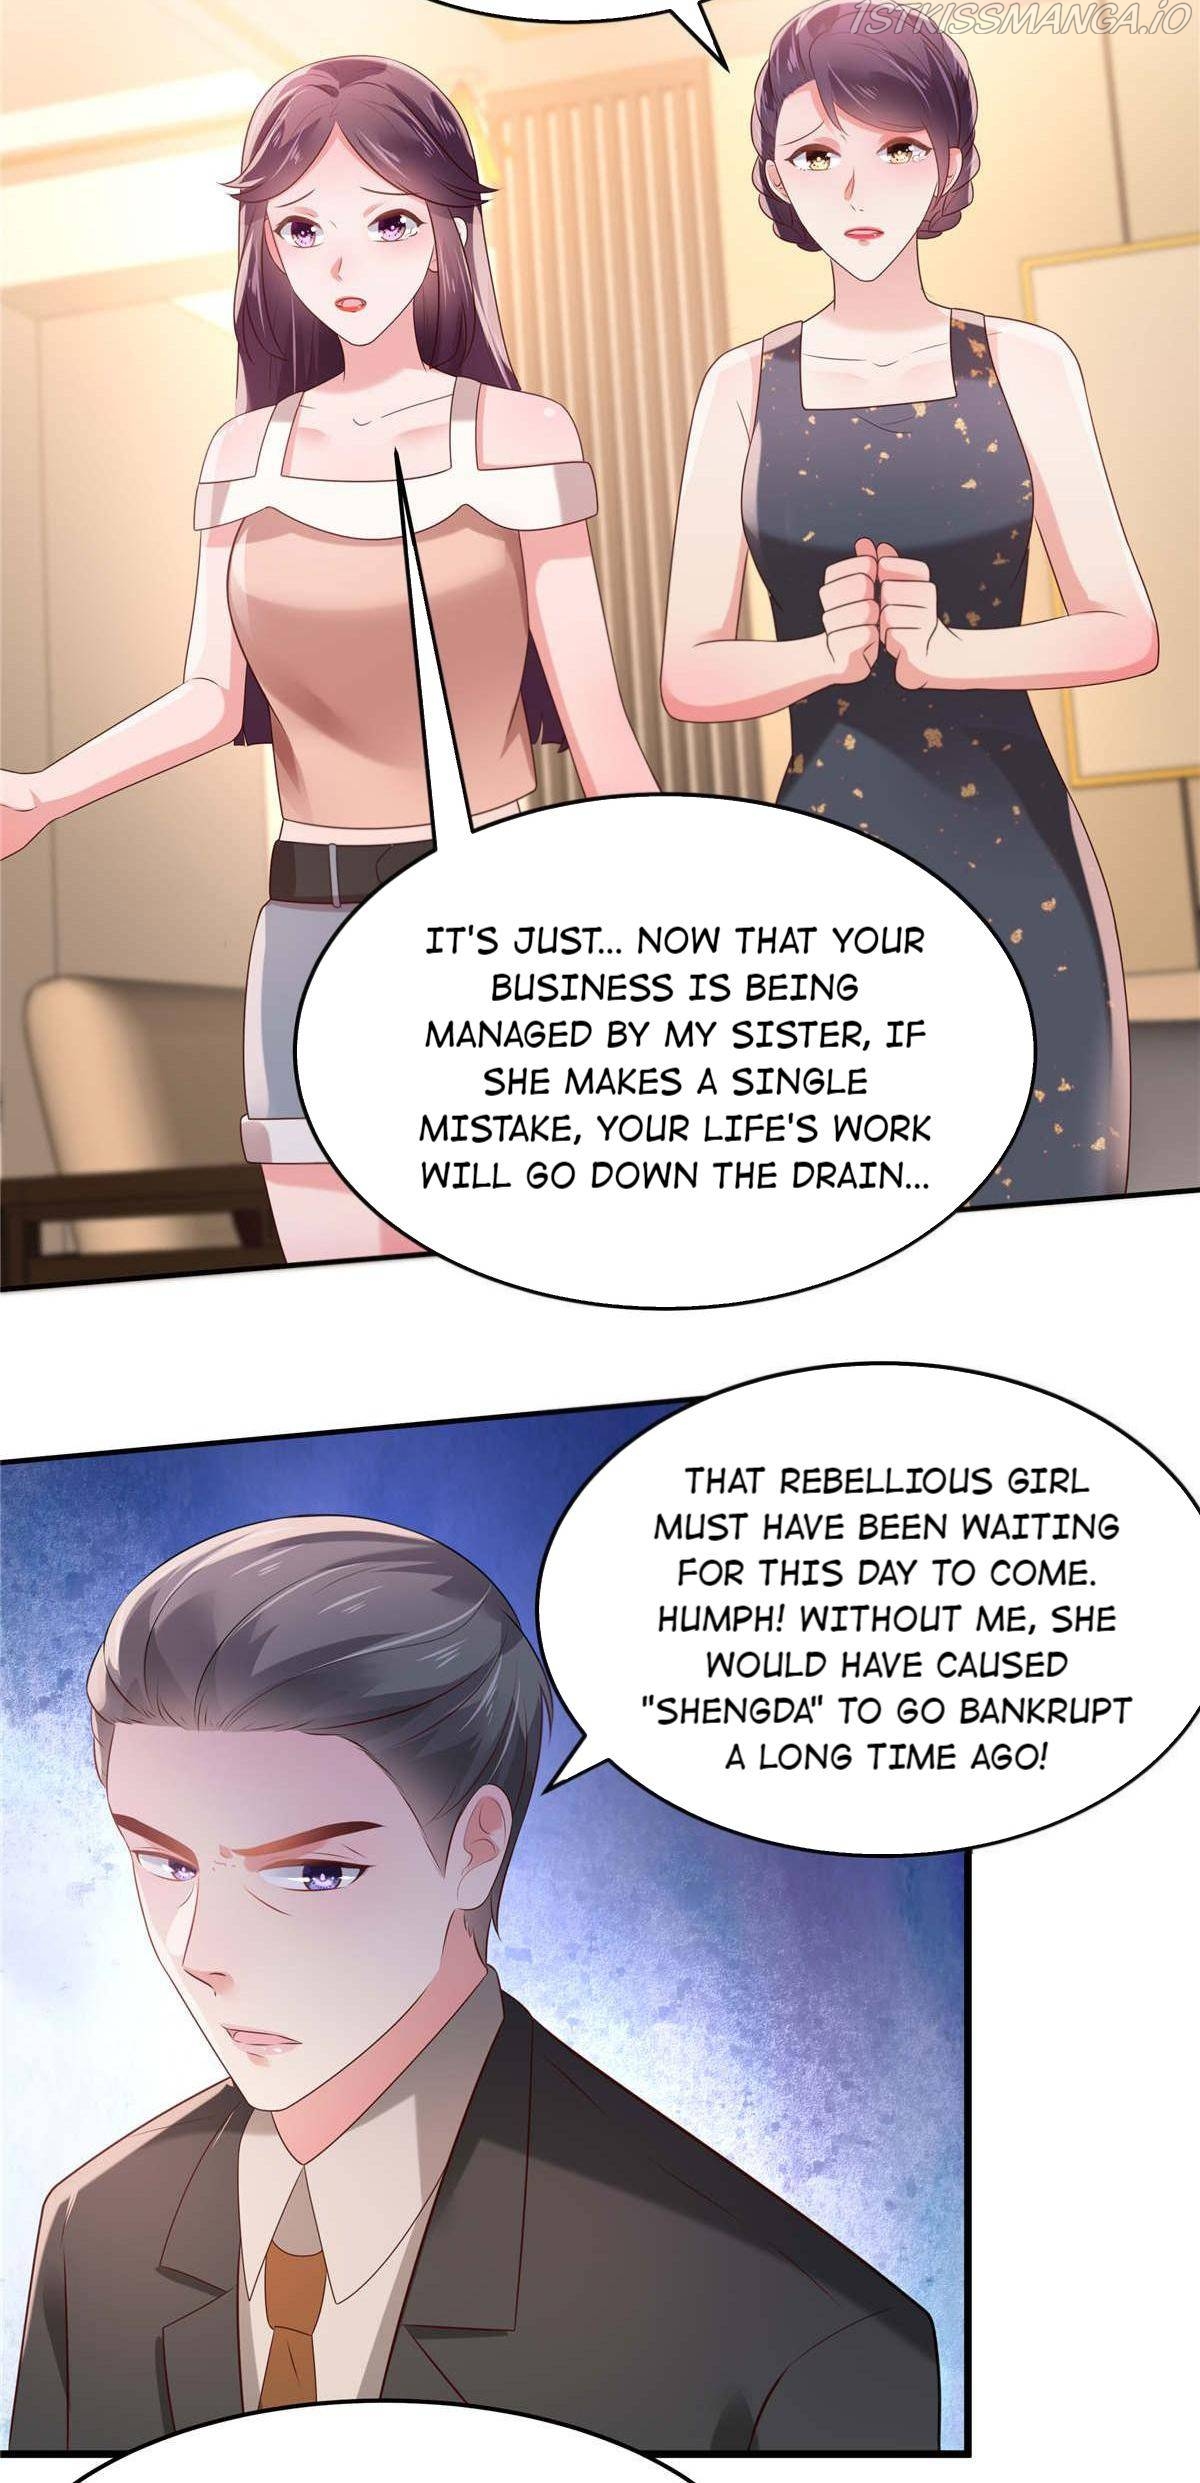 Rebirth Meeting: For You And My Exclusive Lovers - Page 3